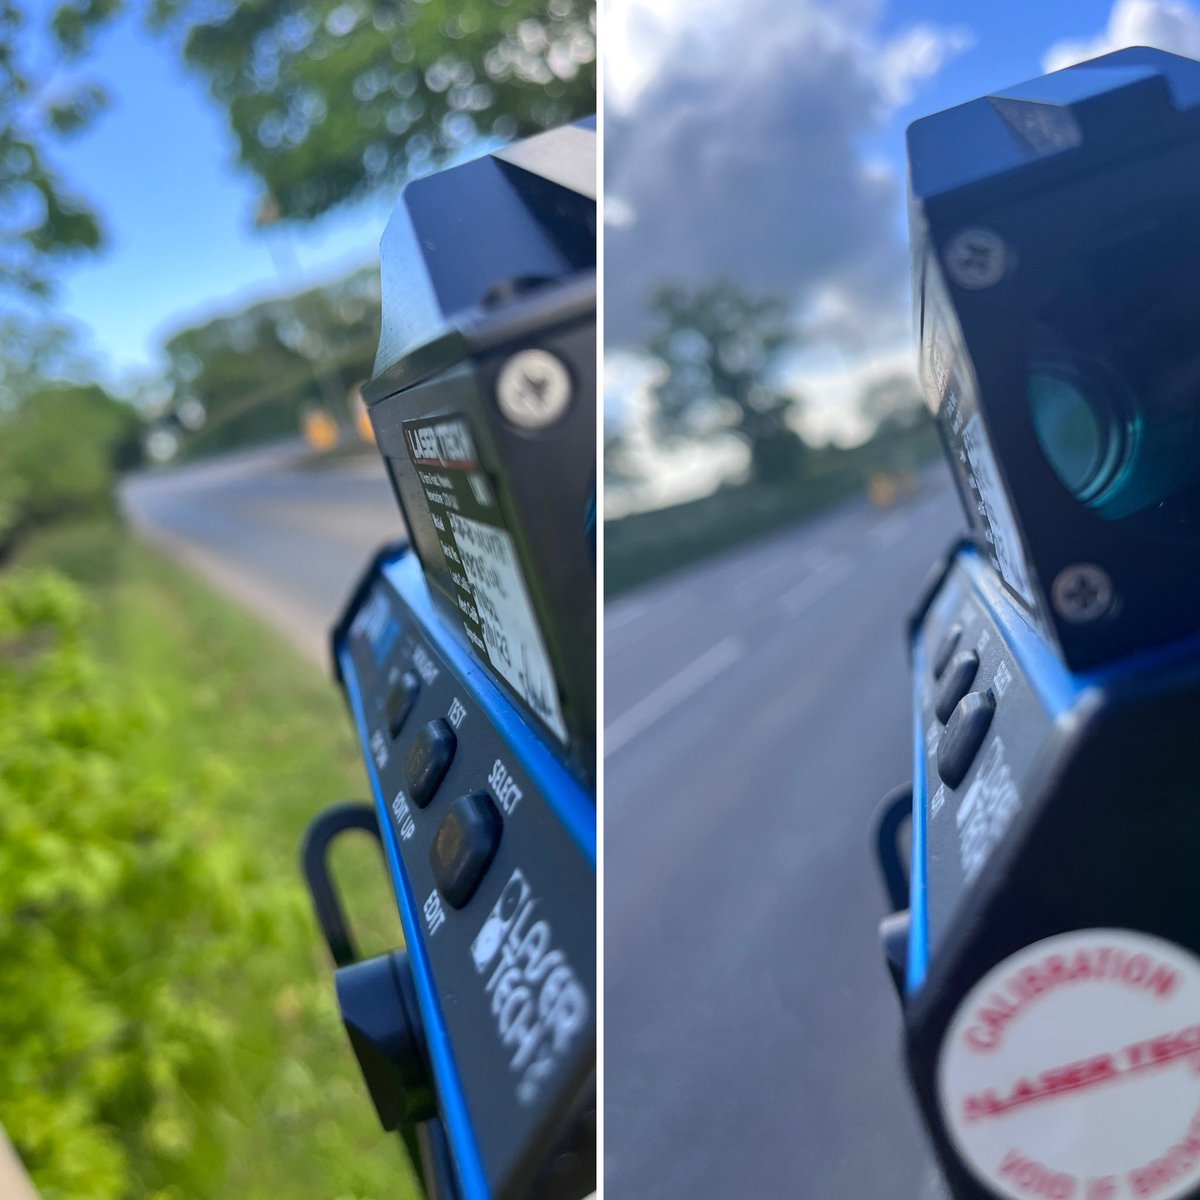 Following complaints about speeding vehicles in Copplestone near Crediton … a spot of speed monitoring #communityissues #communitypolicing #speedawareness #neighbourhoodpolicing